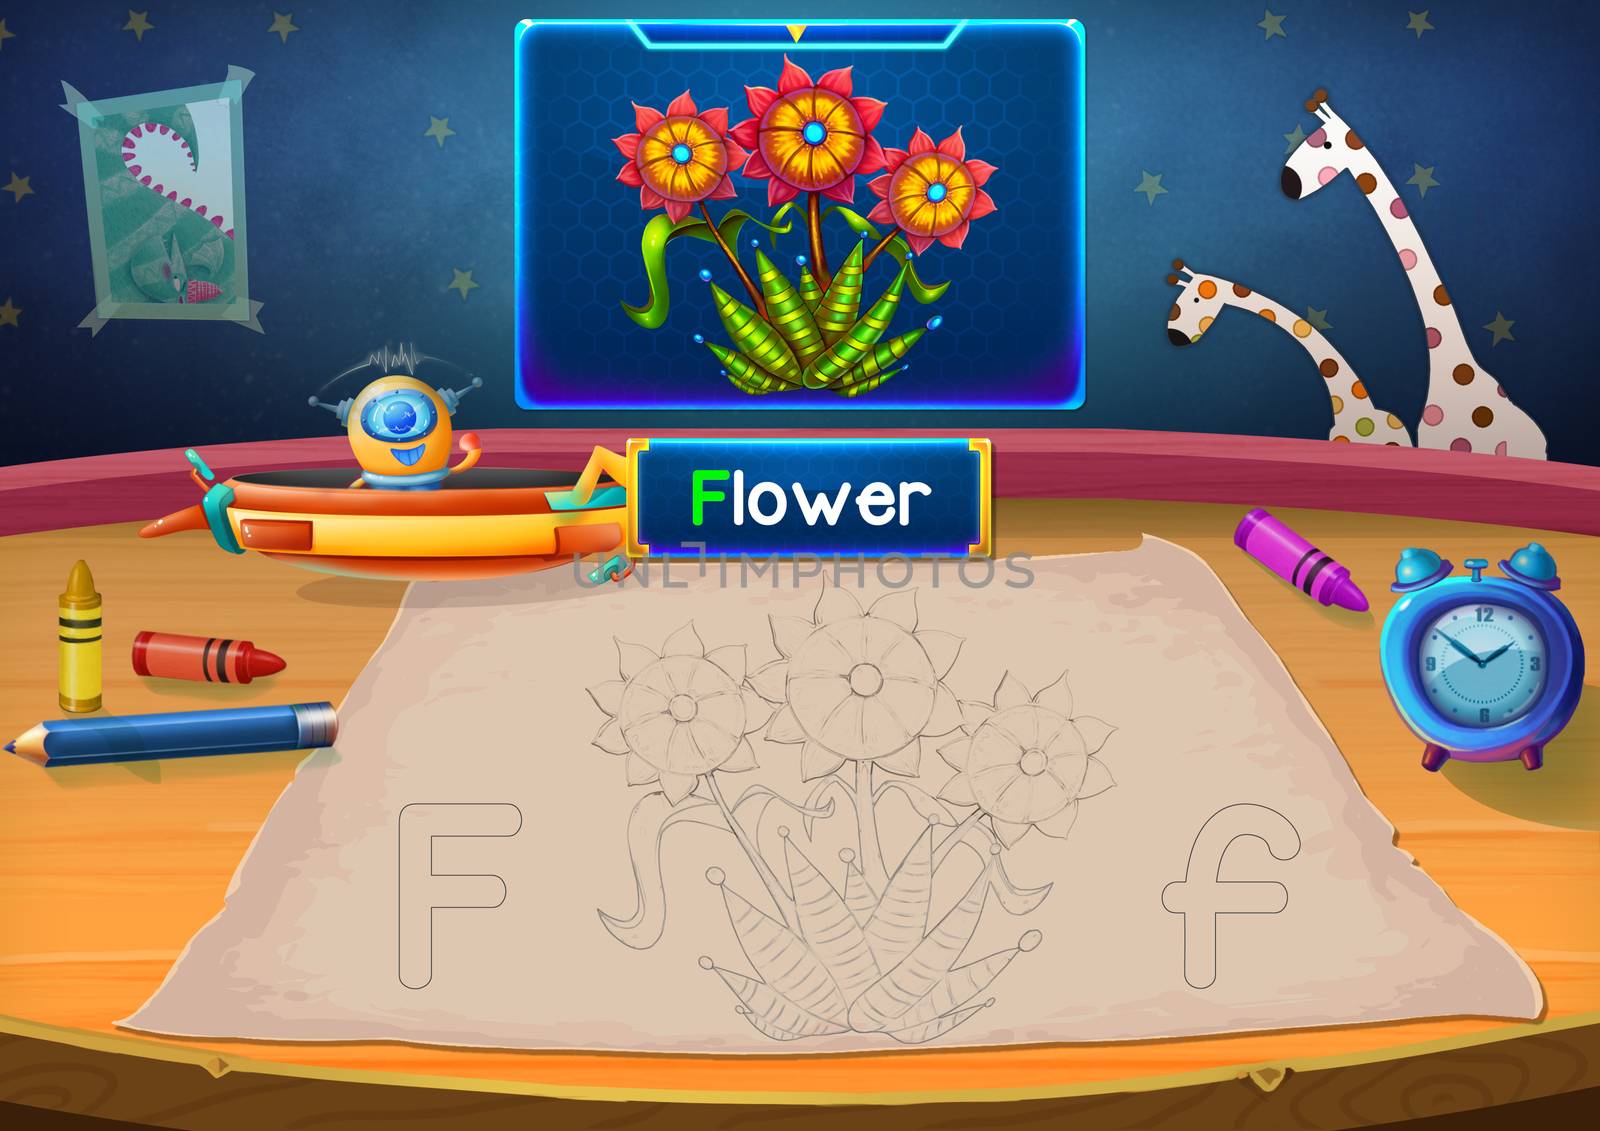 Illustration: Martian Class: F - Flower. The Martian in this picture opens a class for all Aliens. You must follow and use crayons coloring the outlines below. Fantastic Sci-Fi Cartoon Scene Design.